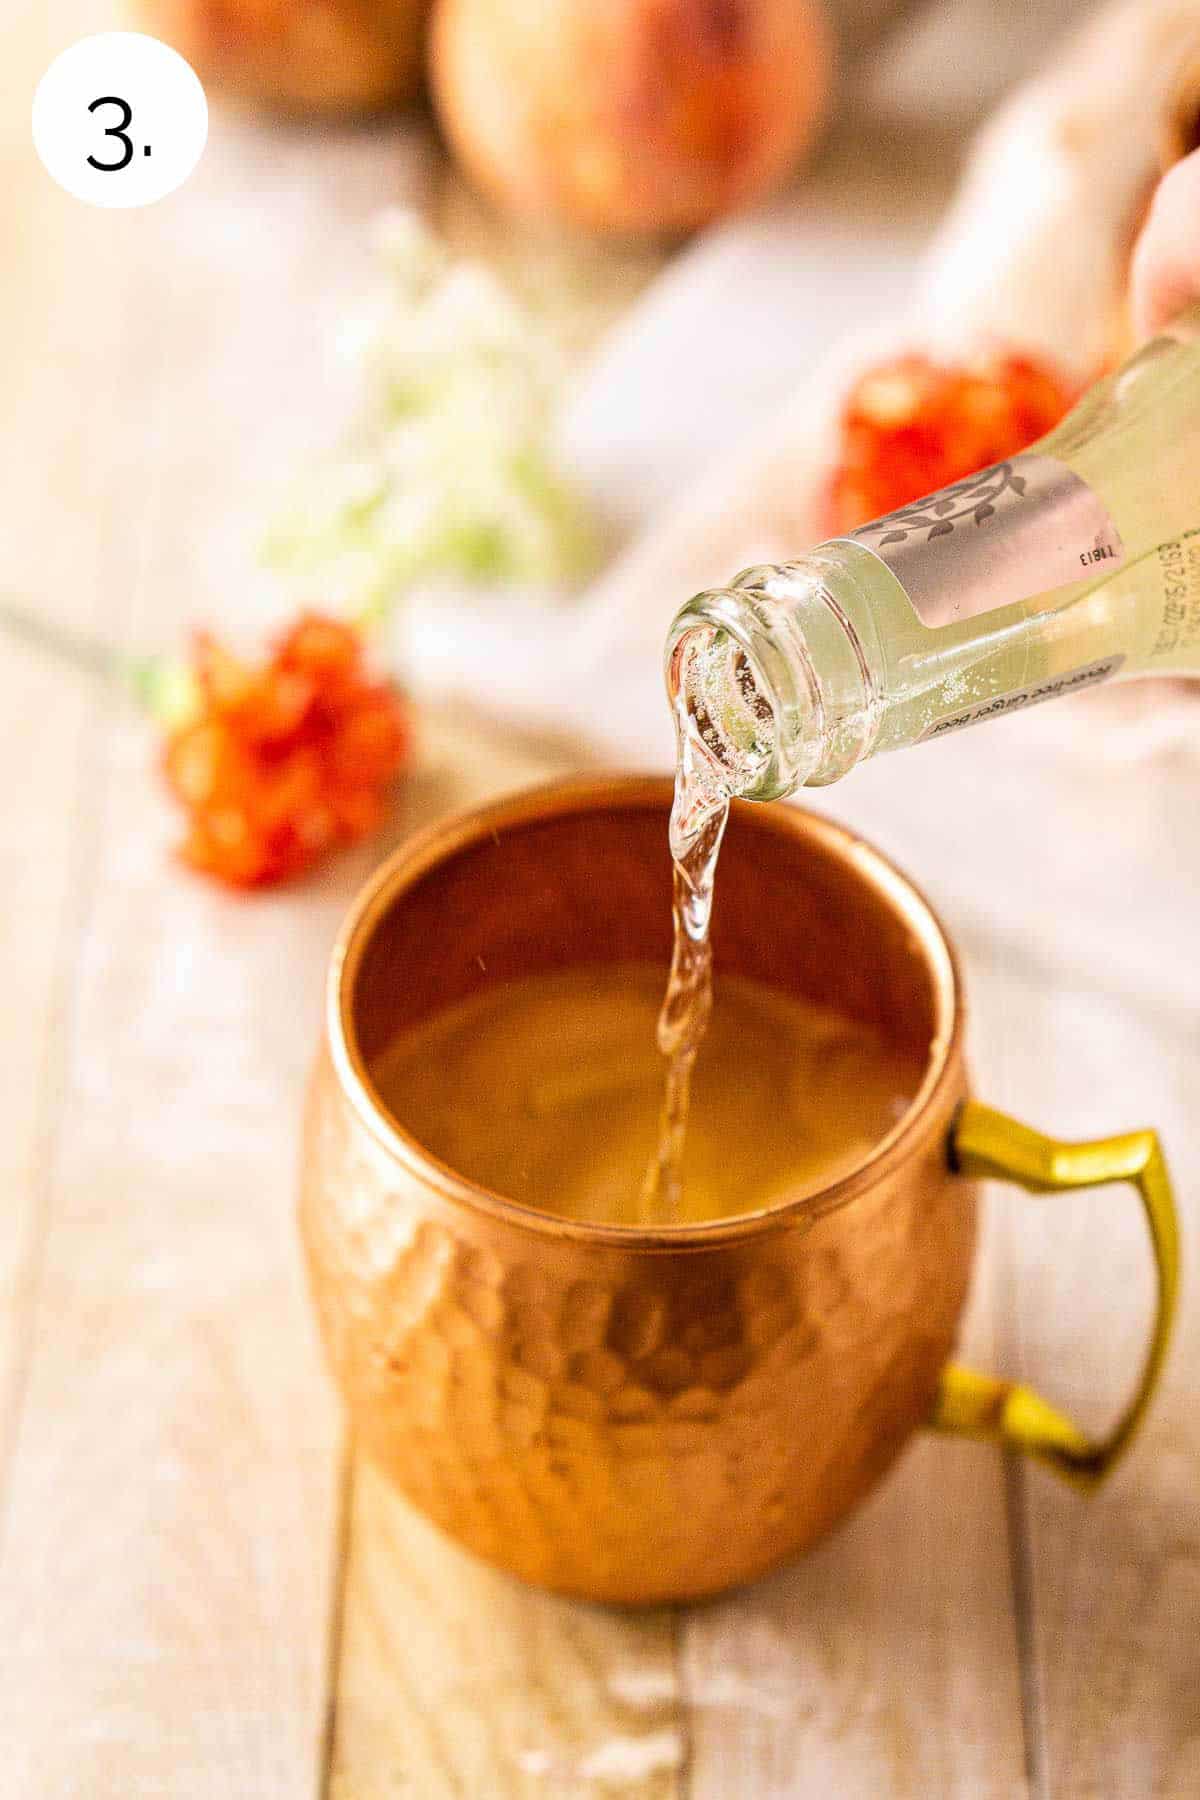 Pouring a bottle of ginger beer into the copper mug on a cream-colored wooden surface.